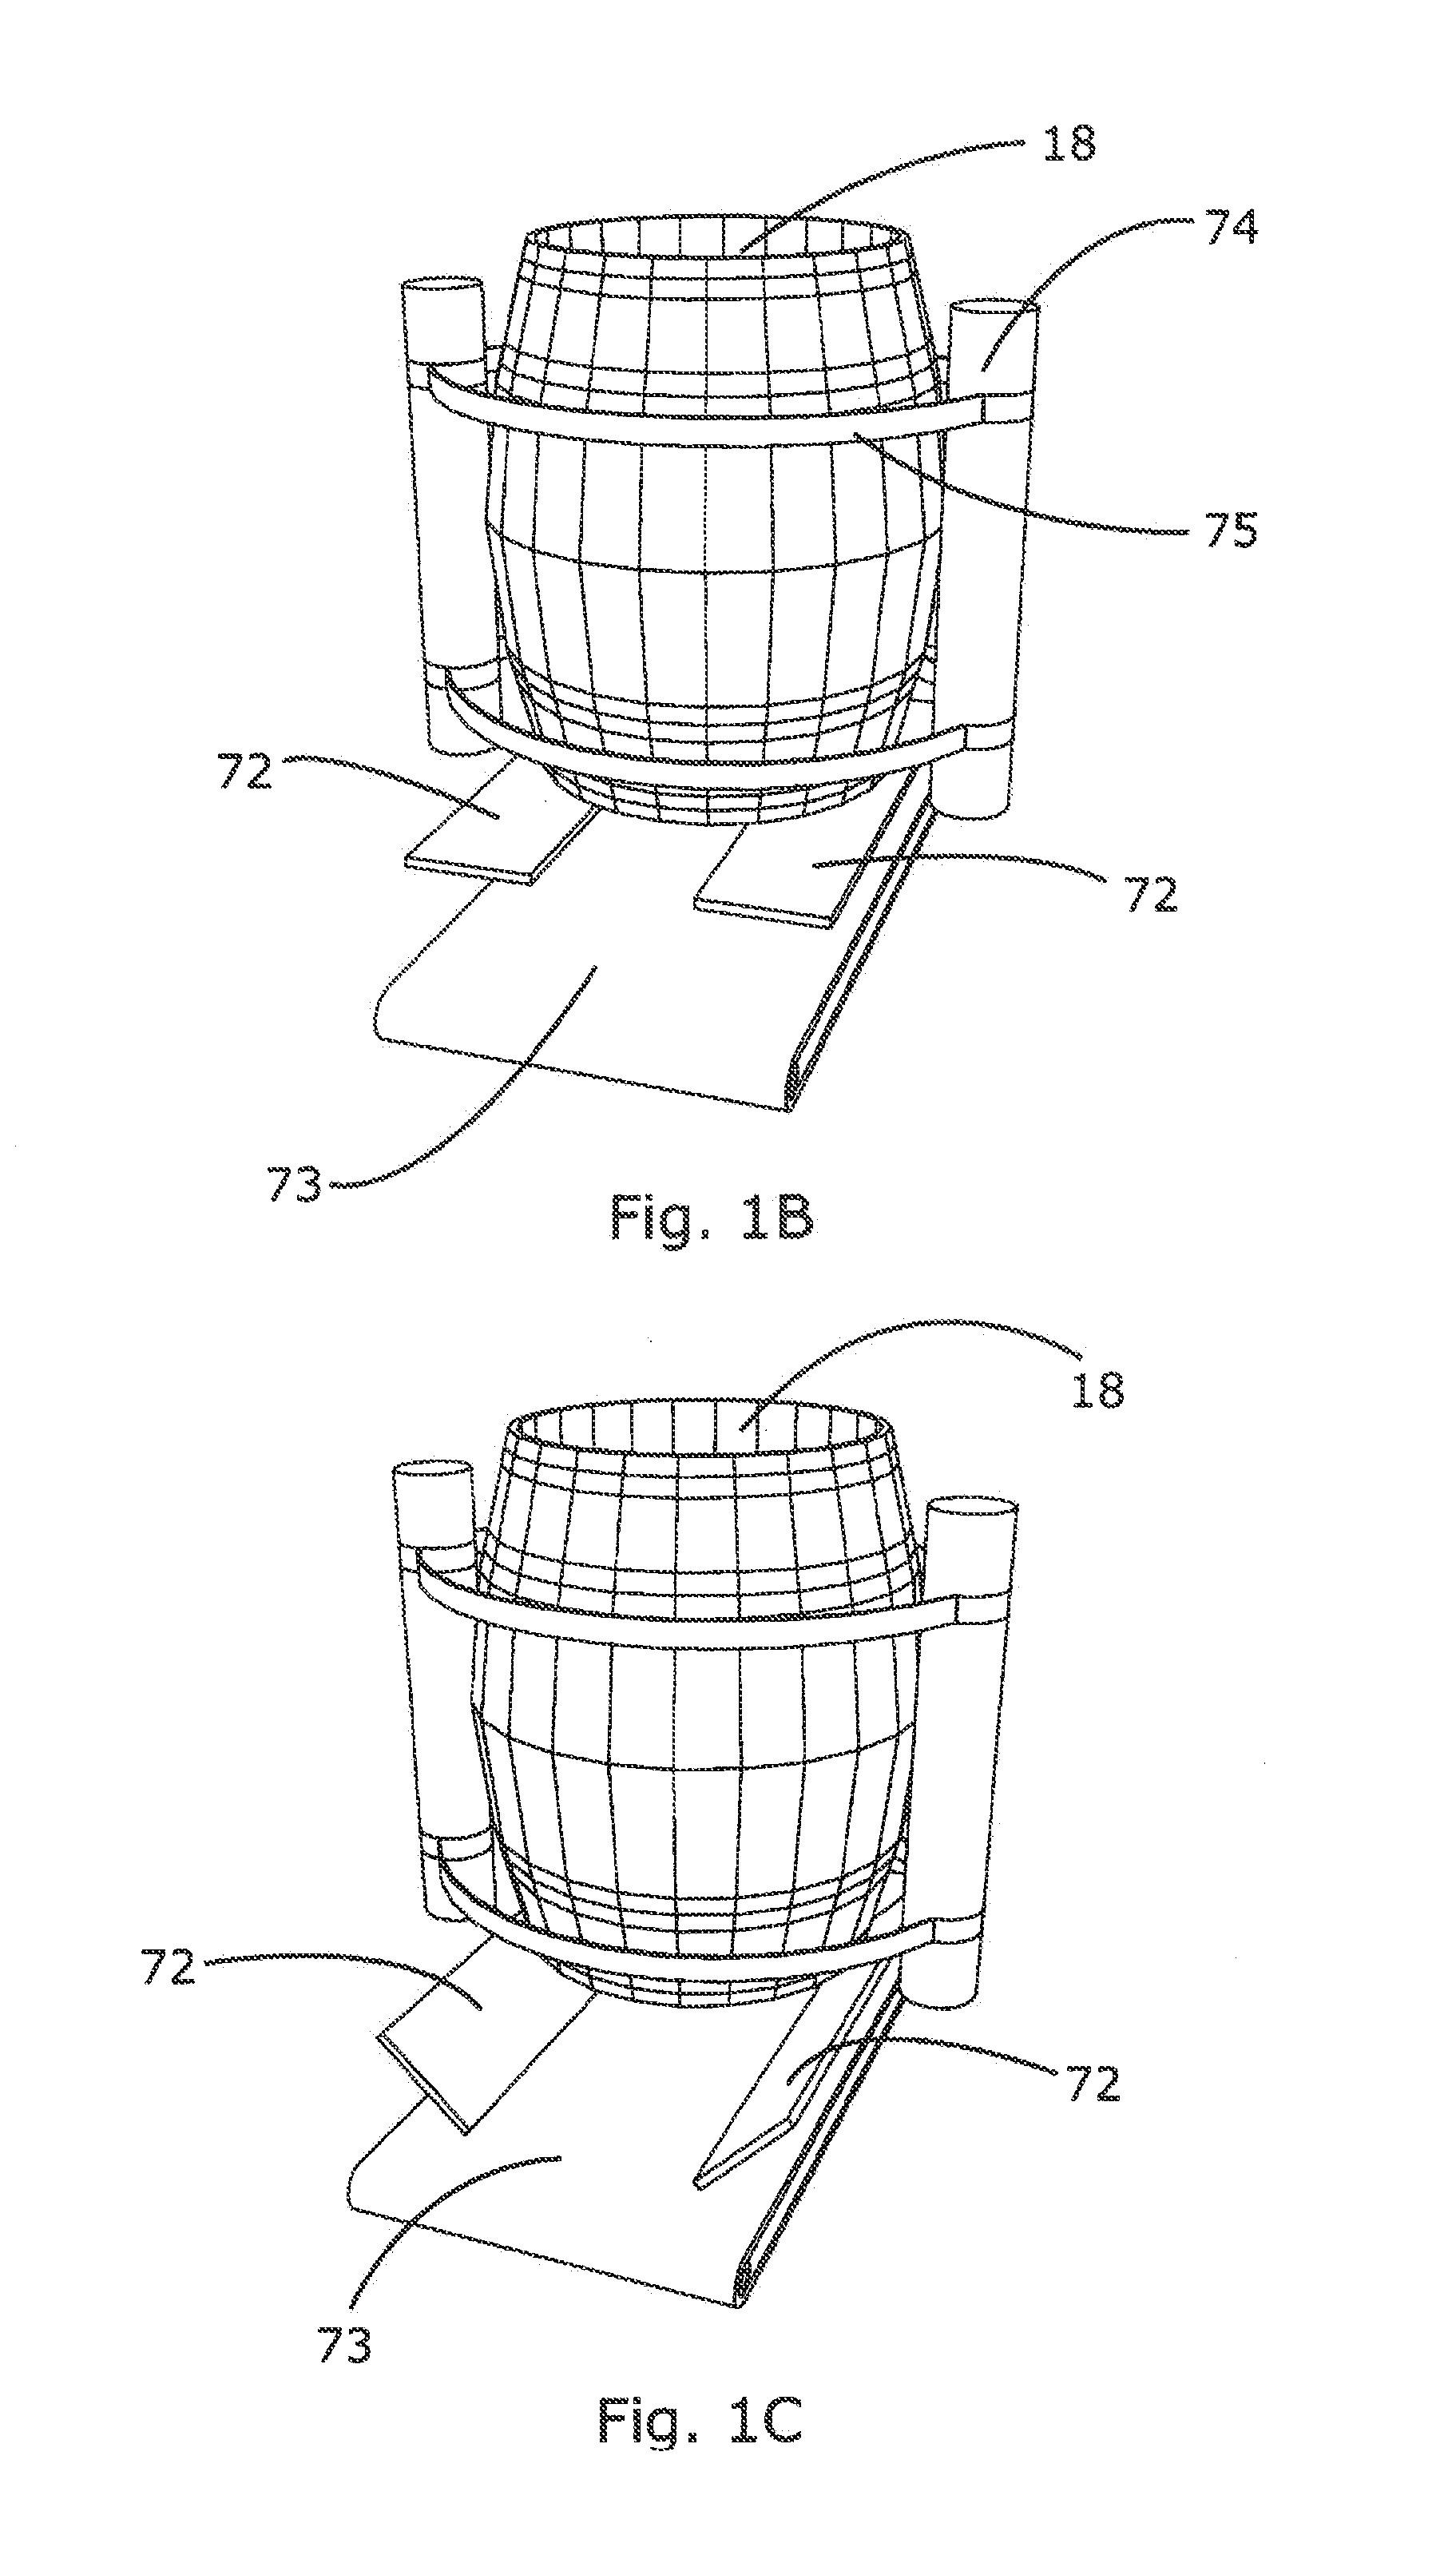 System and method for the reconditioning of barrels including a robotic arm with a removable laser module